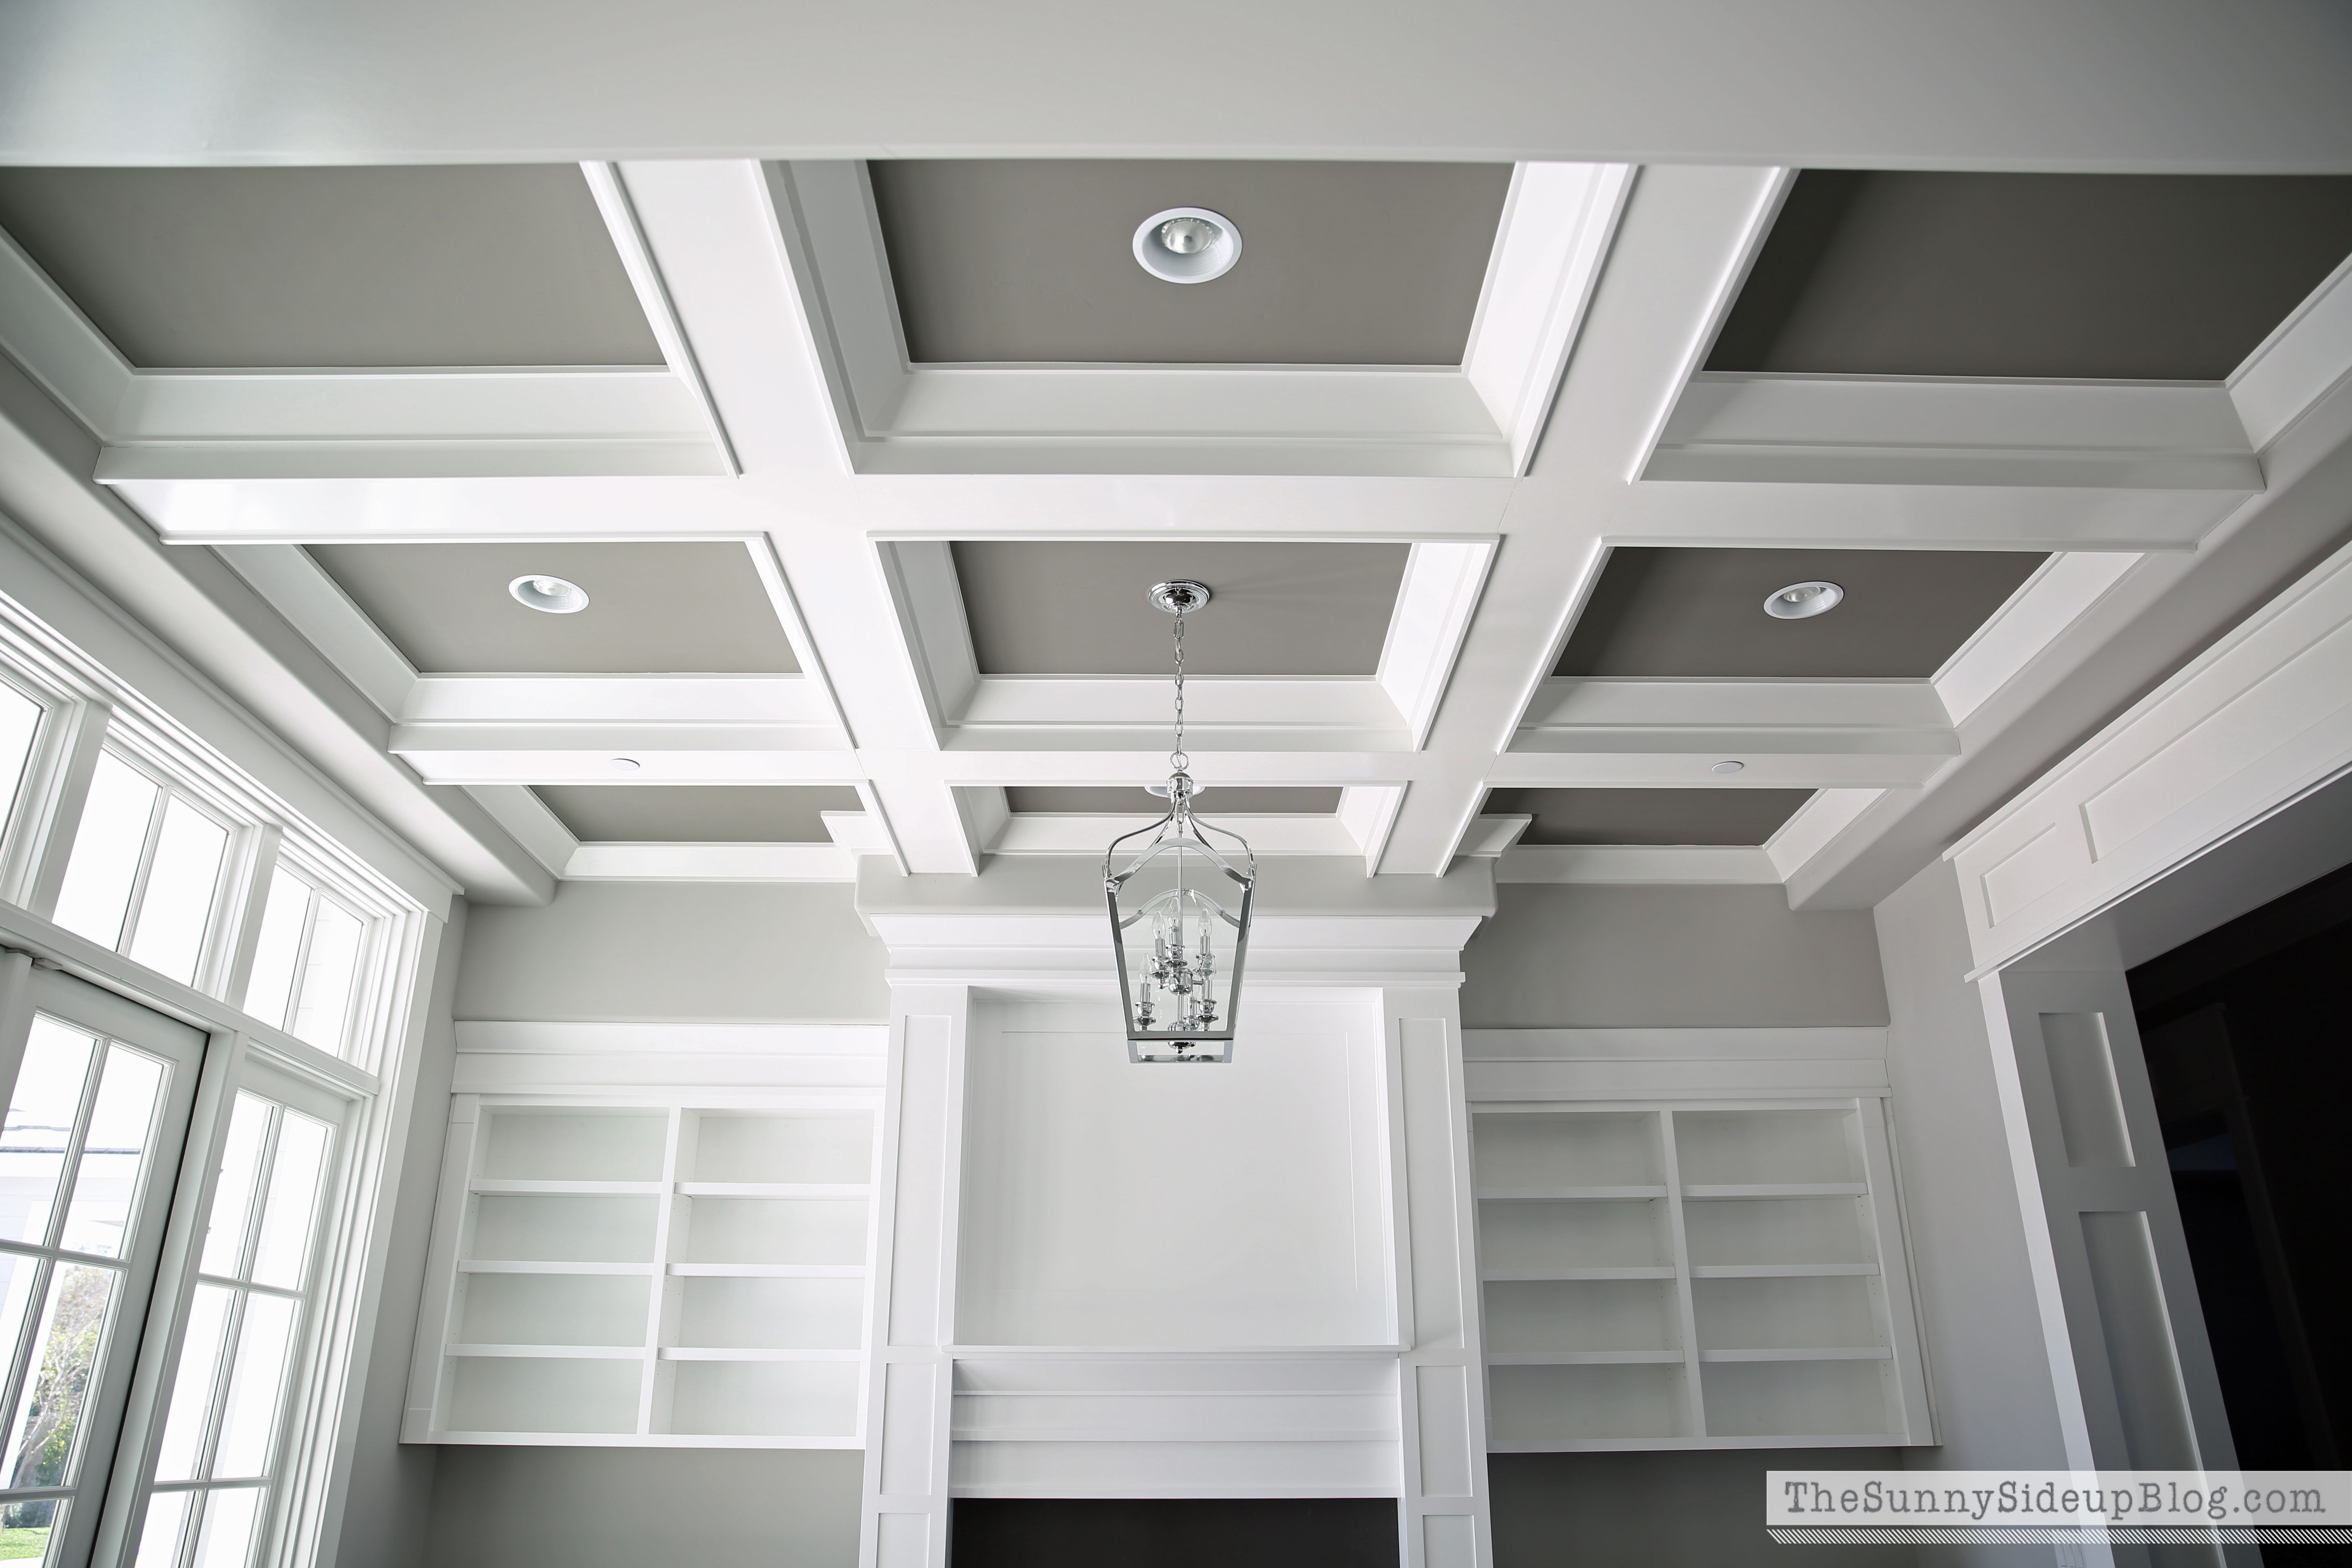 Coffered Ceiling Redflagdeals Com Forums, How Much Does It Cost To Do A Coffered Ceiling